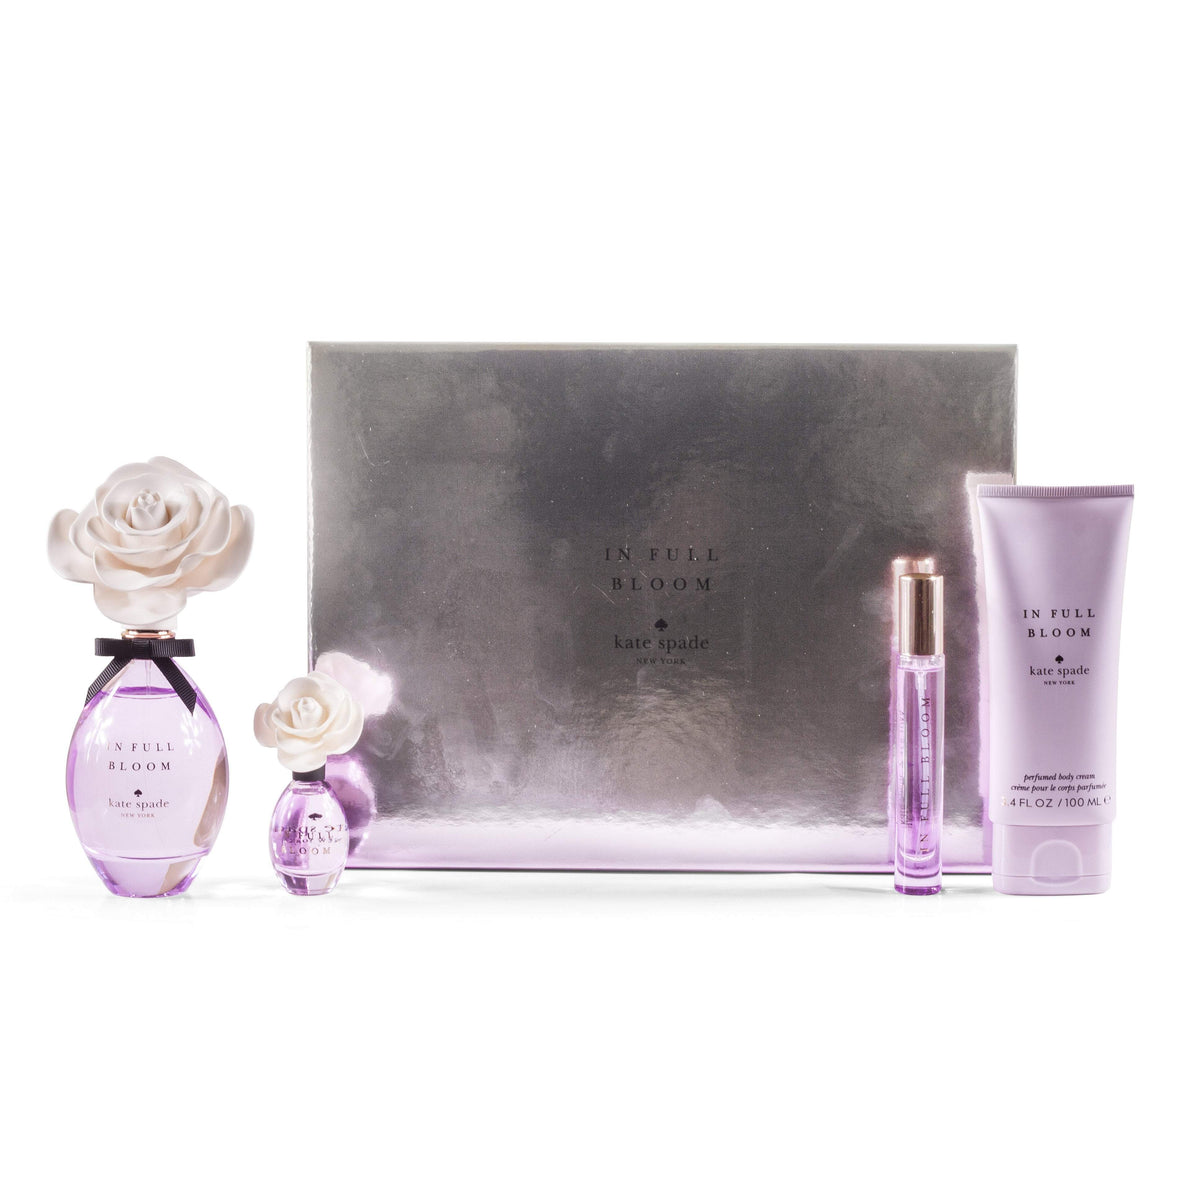 In Full Bloom Gift Set for Women by Kate Spade 3.4 oz.